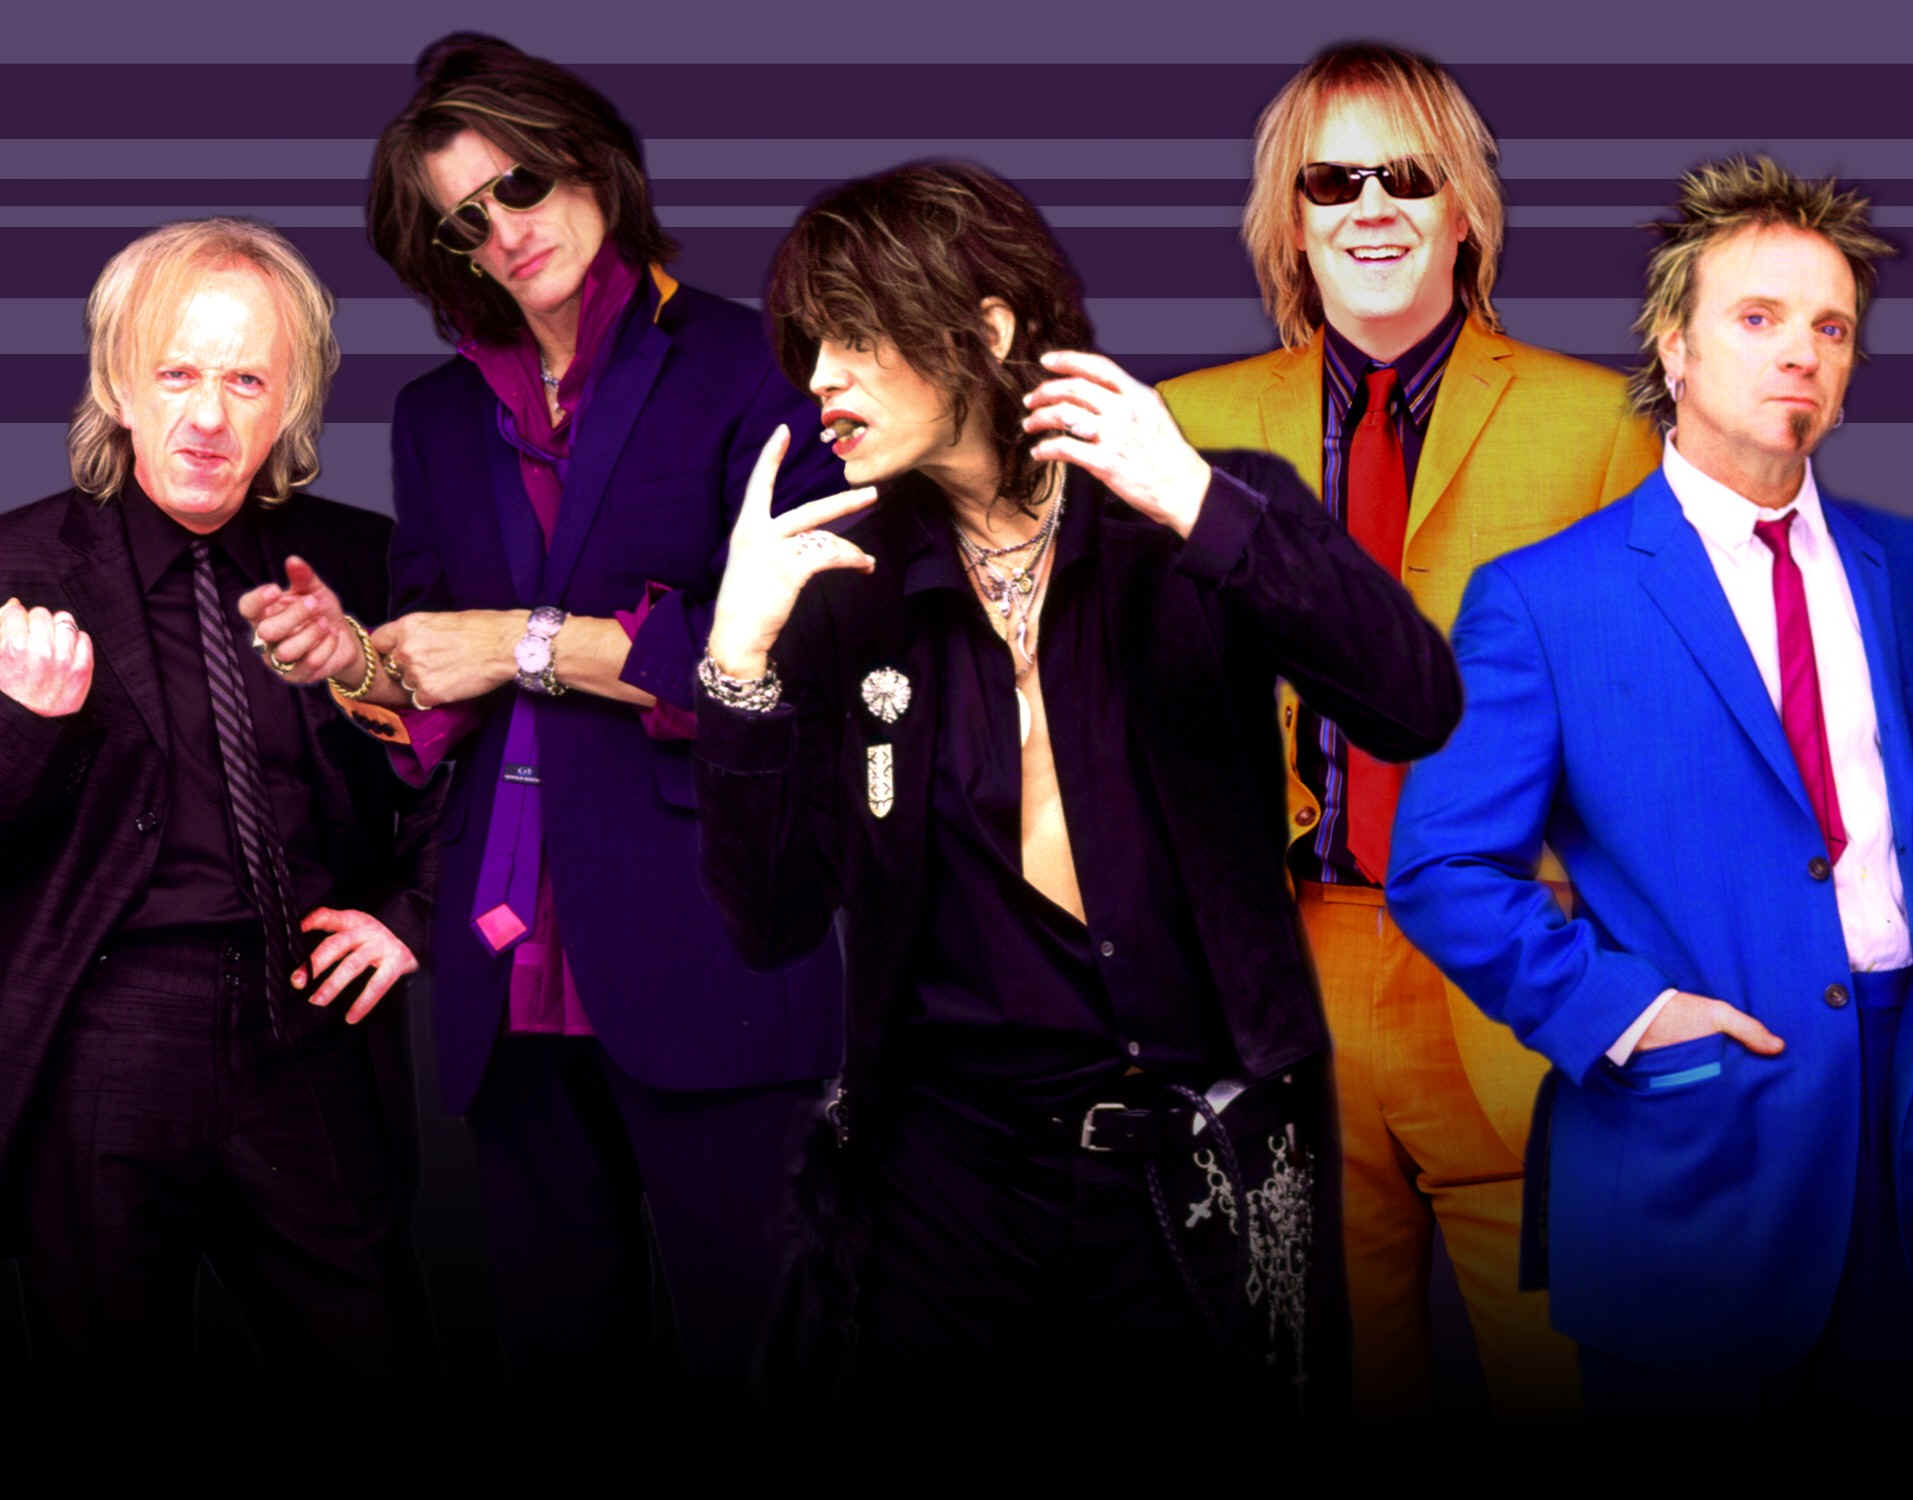 Aerosmith Wallpaper Pictures A122904 Rock